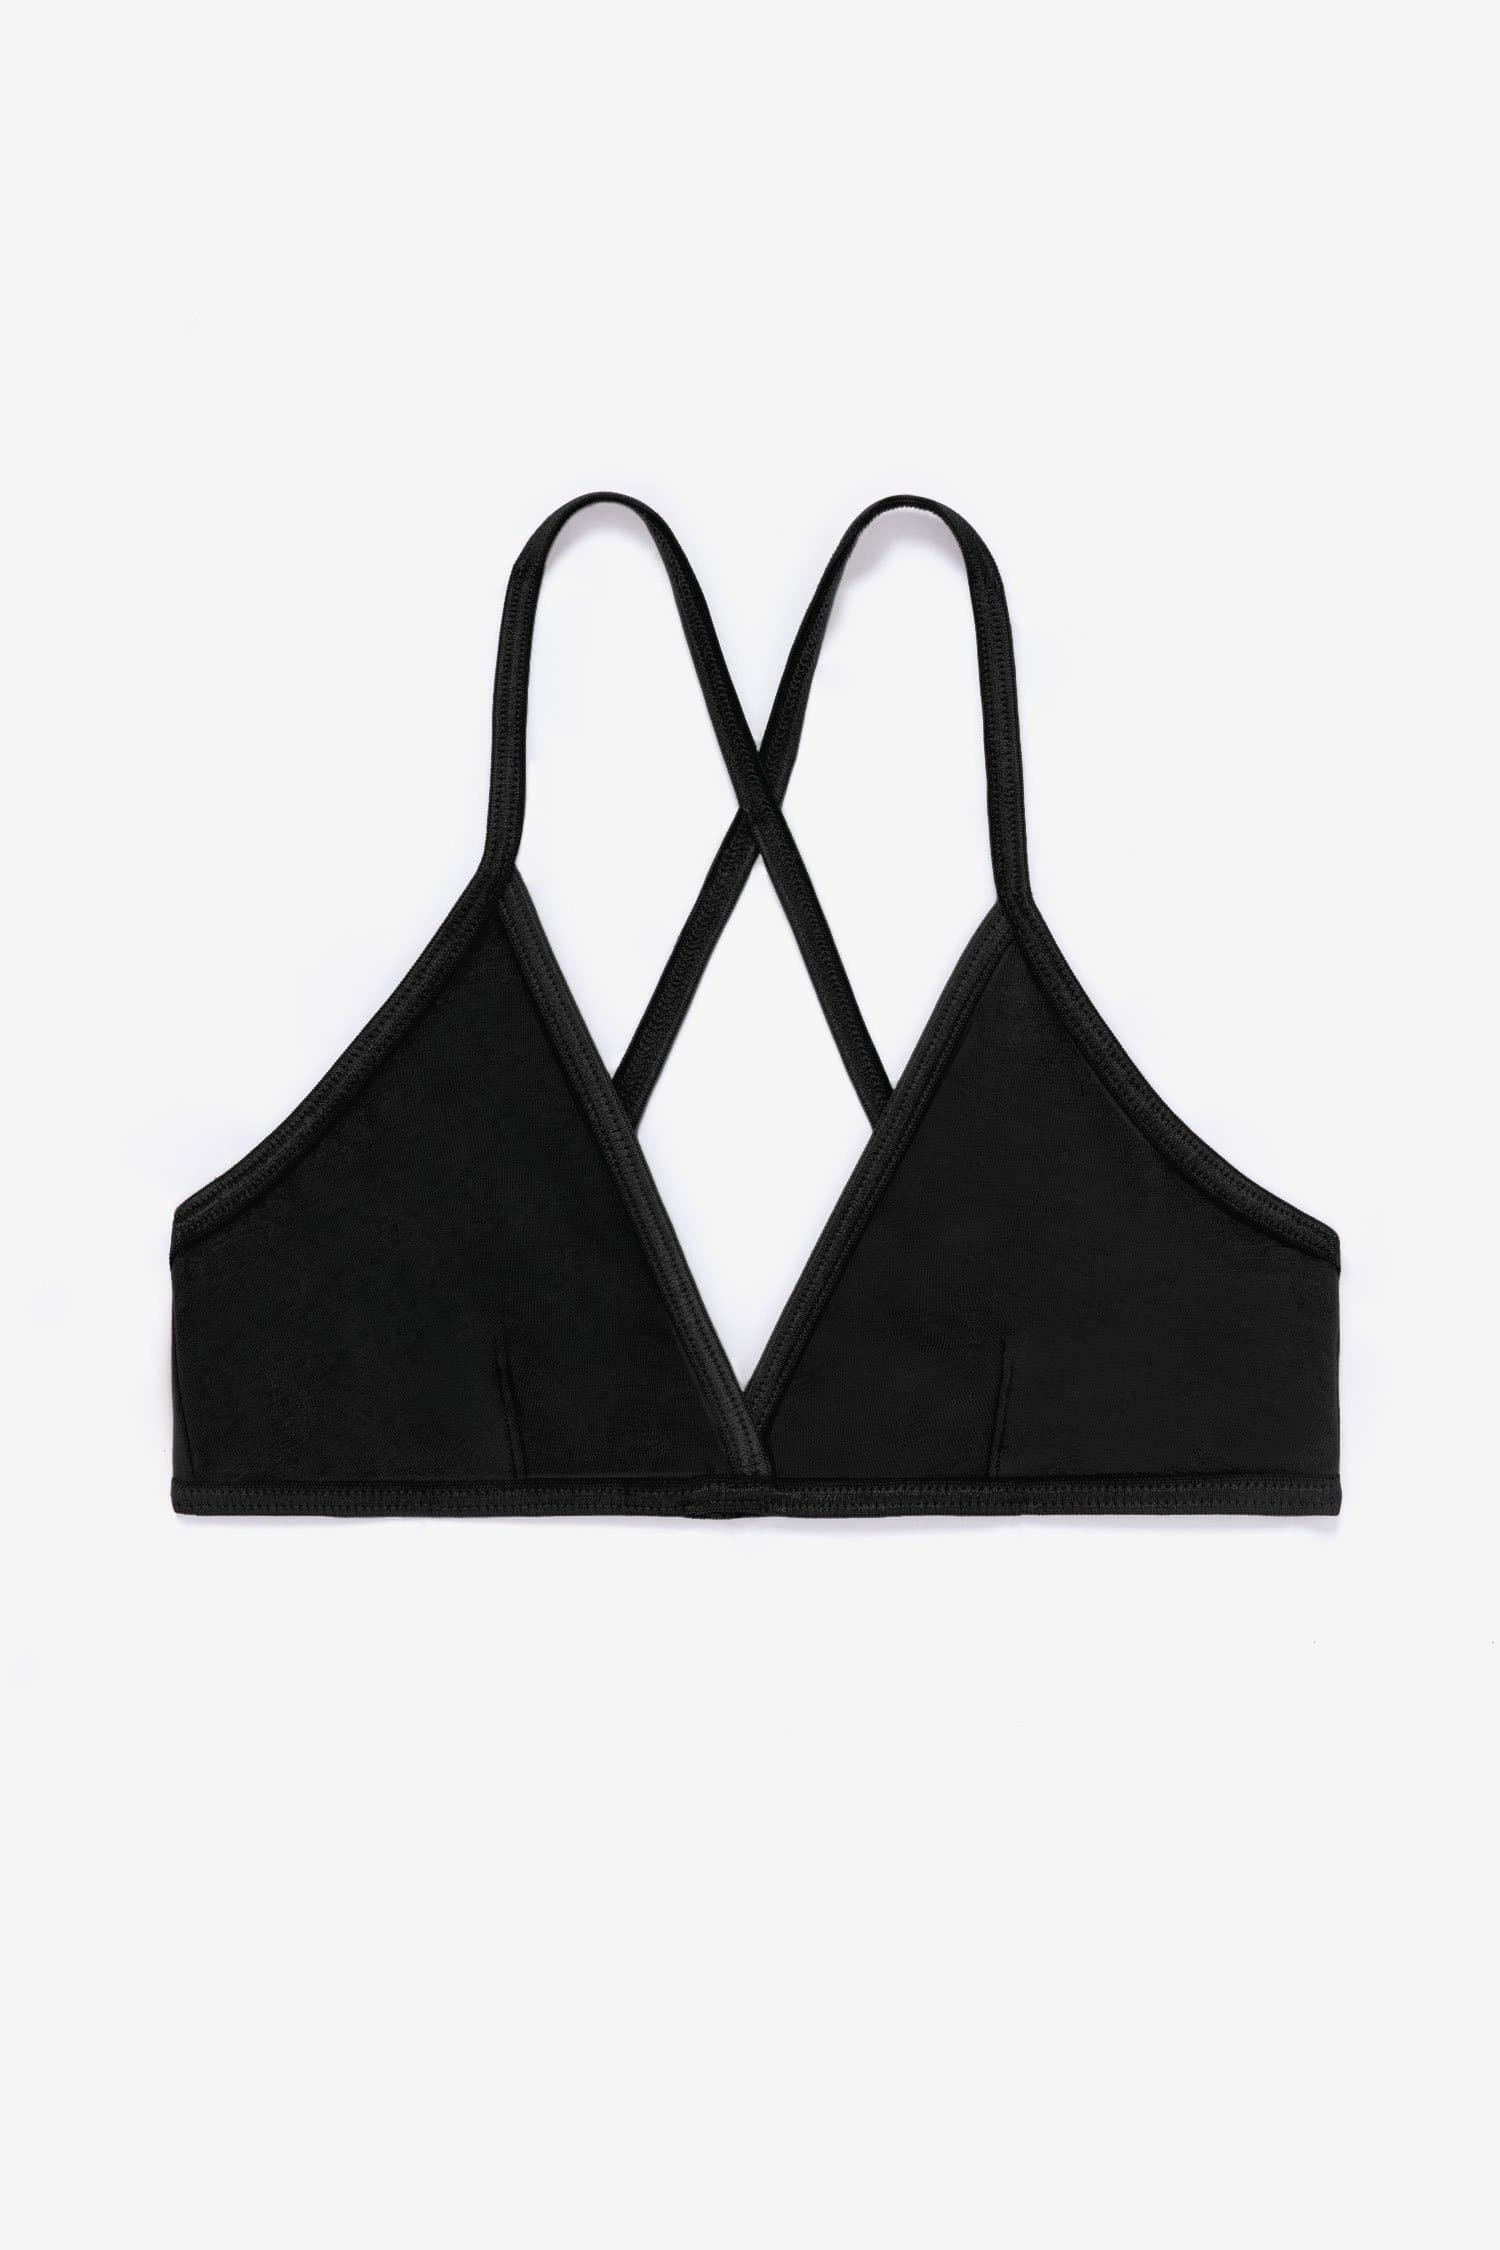 We Are We Wear poly blend mesh bralet with seam detail in black